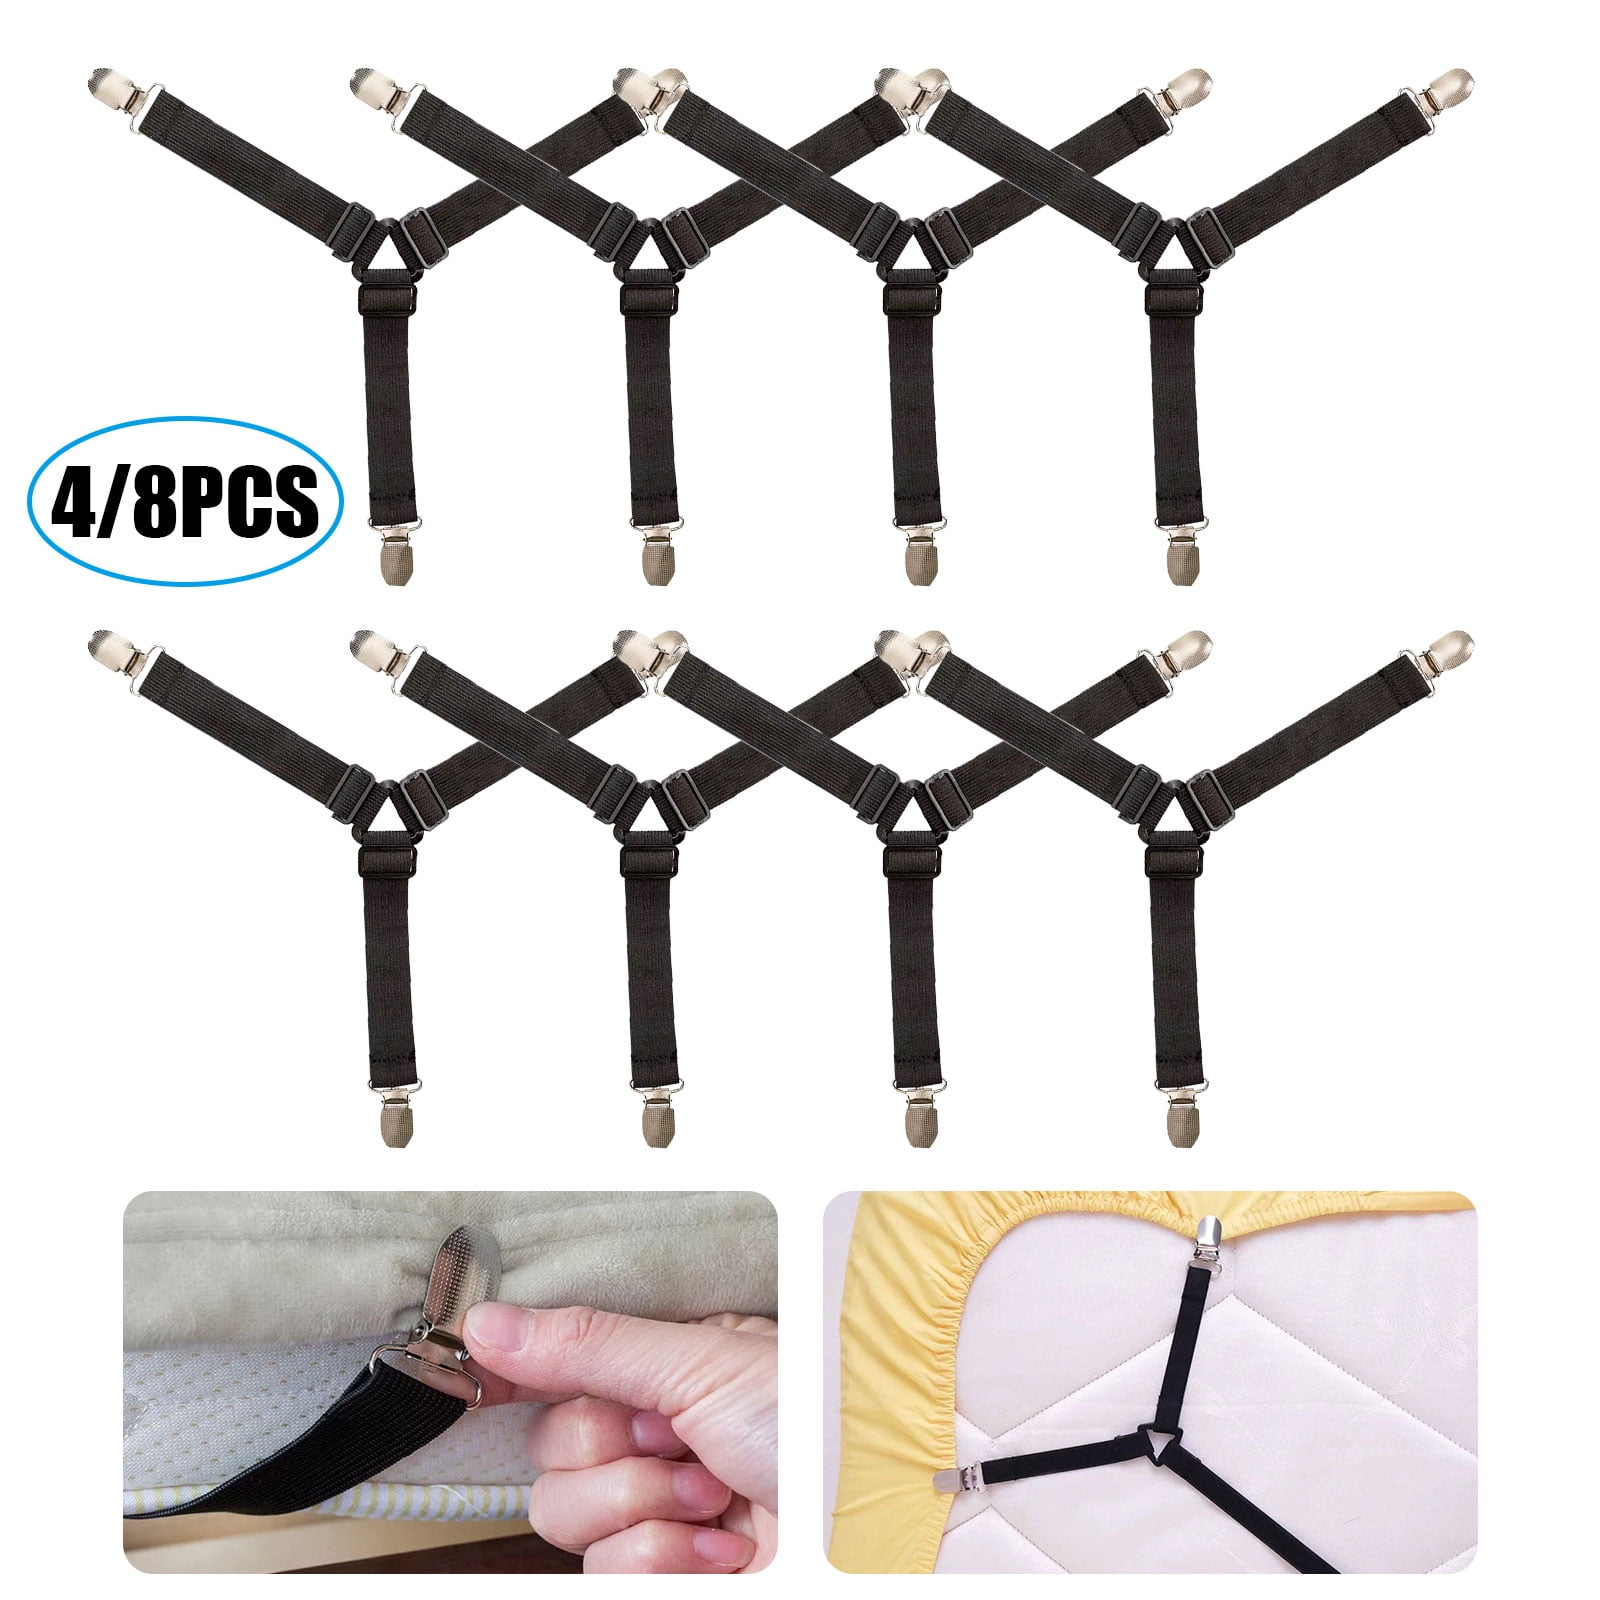 4xTriangle Bed Mattress Sheet Clips Grippers Straps Suspender Fasteners Holder S 